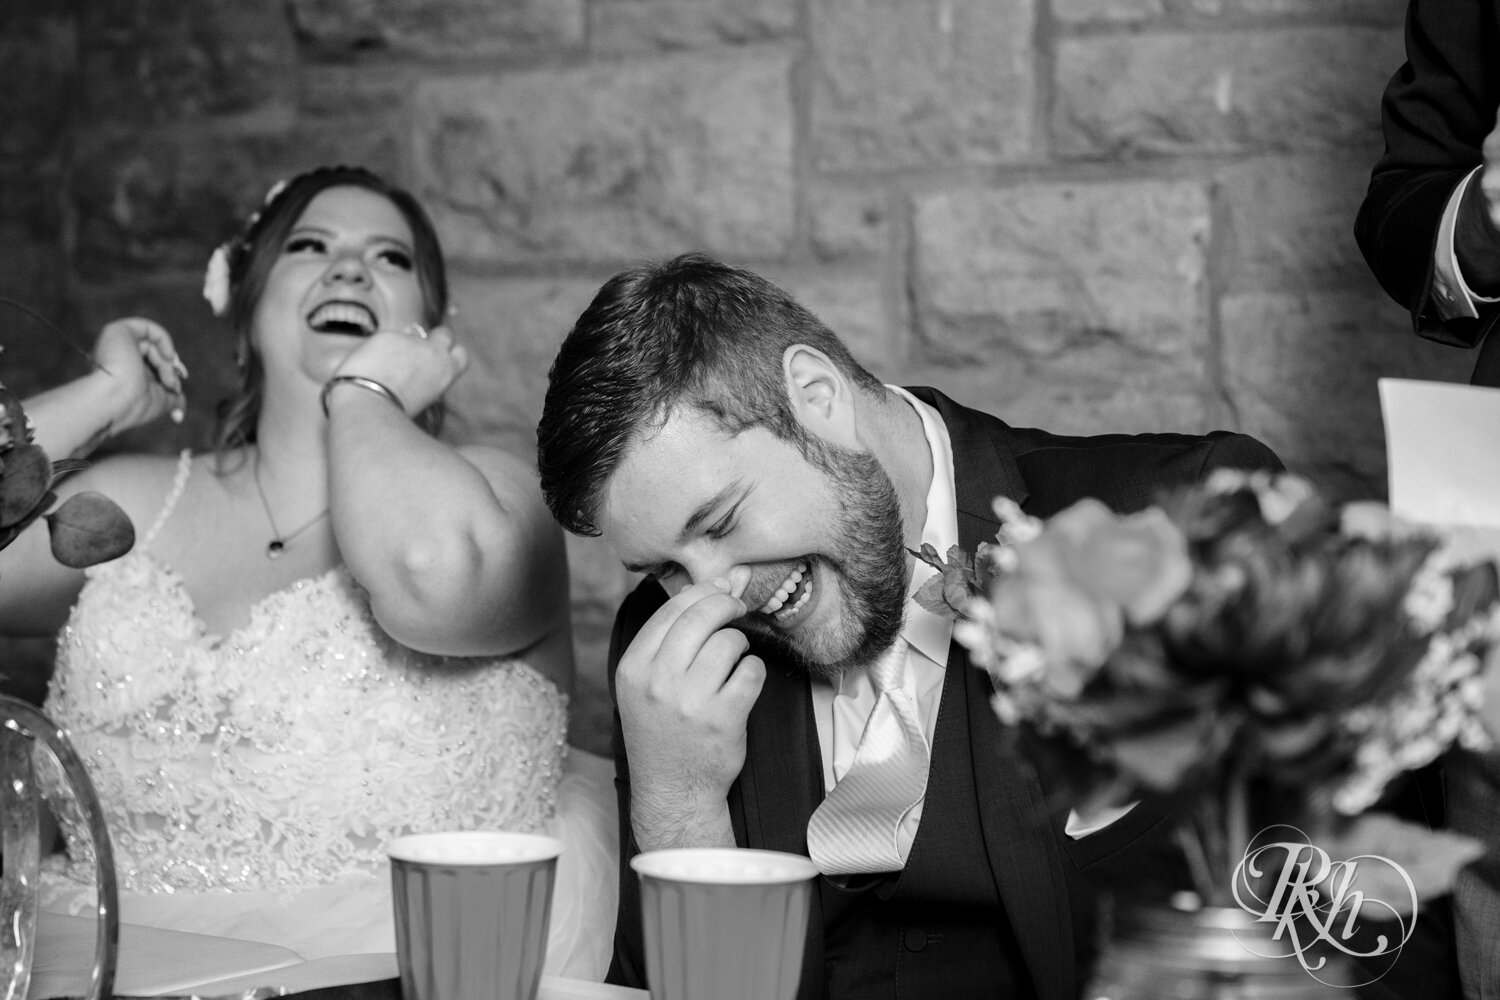 Plus size bride and groom laugh at wedding reception at Olmsted County Fairgrounds in Rochester, Minnesota.